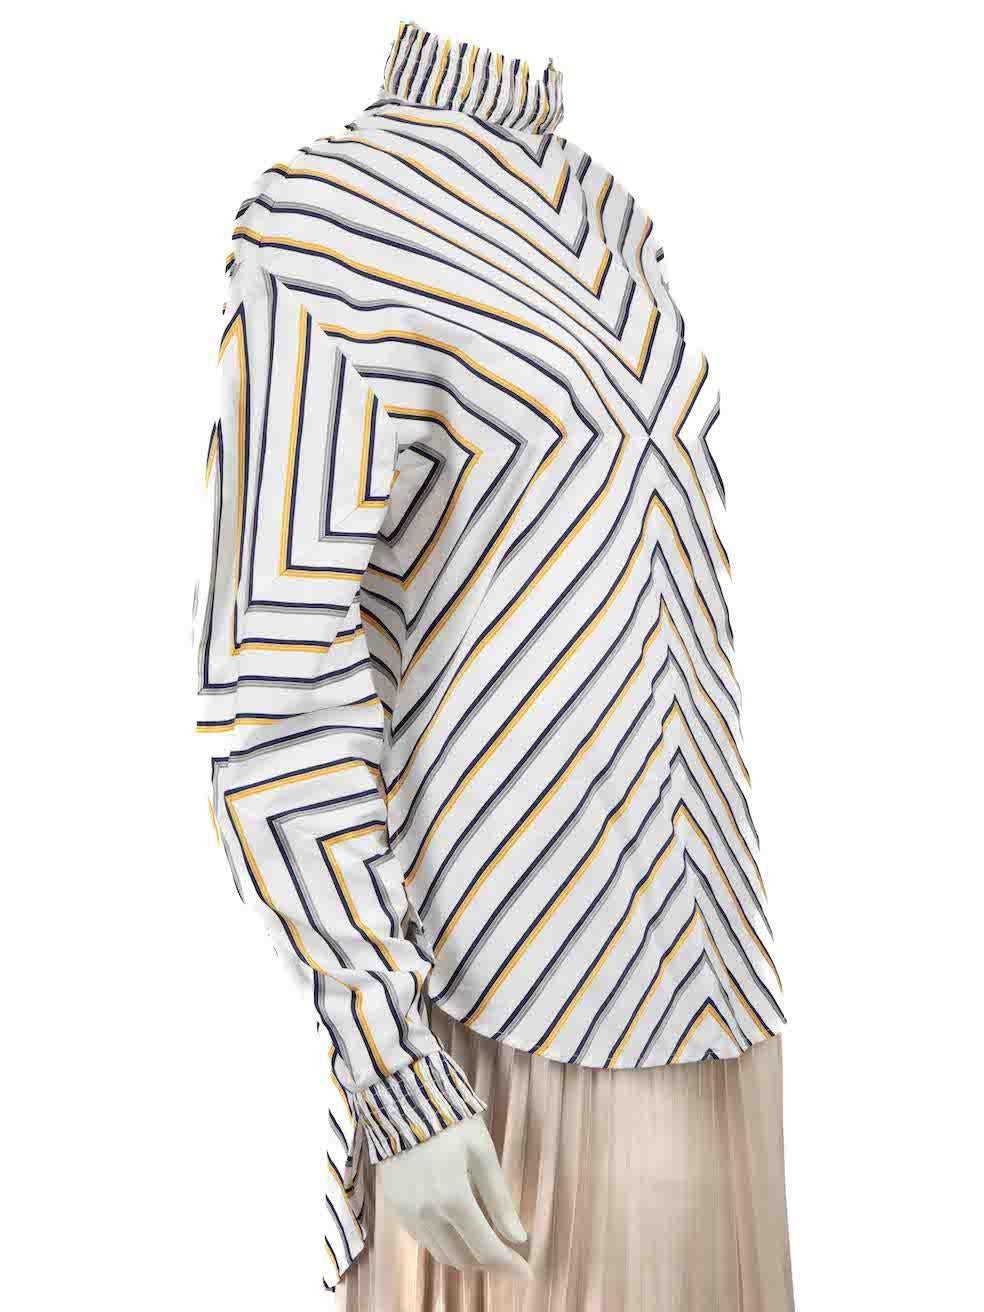 CONDITION is Very good. Minimal wear to shirt is evident. Minimal wear to the left sleeve cuff with light mark on this used Silvia Tcherassi designer resale item.
 
 Details
 White
 Cotton
 Long sleeves blouse
 Striped pattern
 Mock neckline
